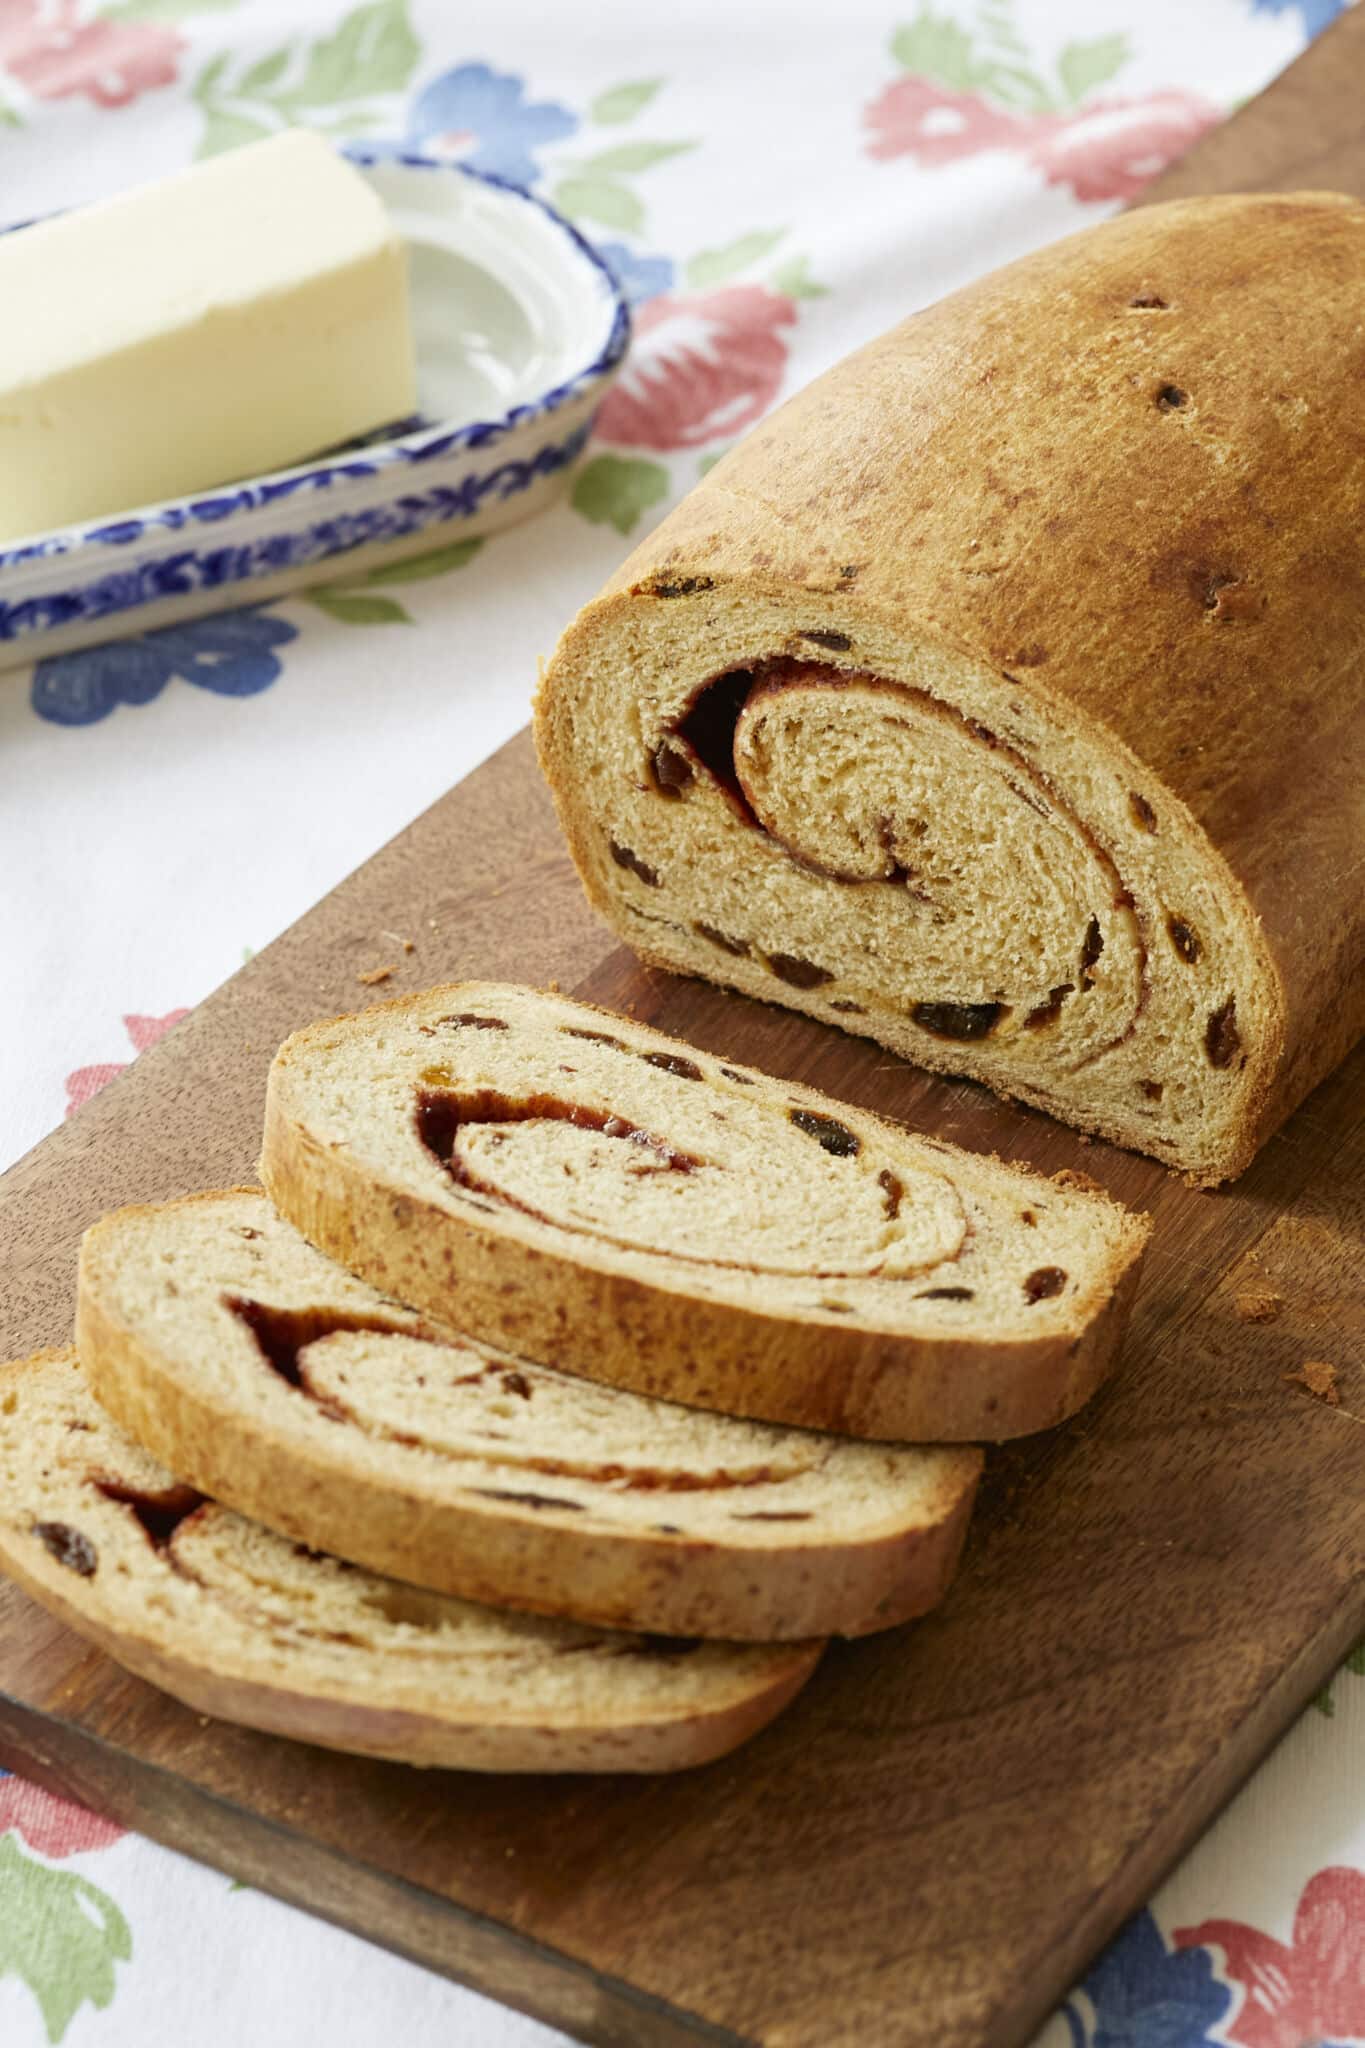 A loaf of Cinnamon Swirl Raisin Bread is sliced and served on a wooden board with butter on the side. The bread has a golden-brown and slightly crispy crust, a tender and even crumb, scattered raisins, and cinnamon swirls throughout upon slicing.